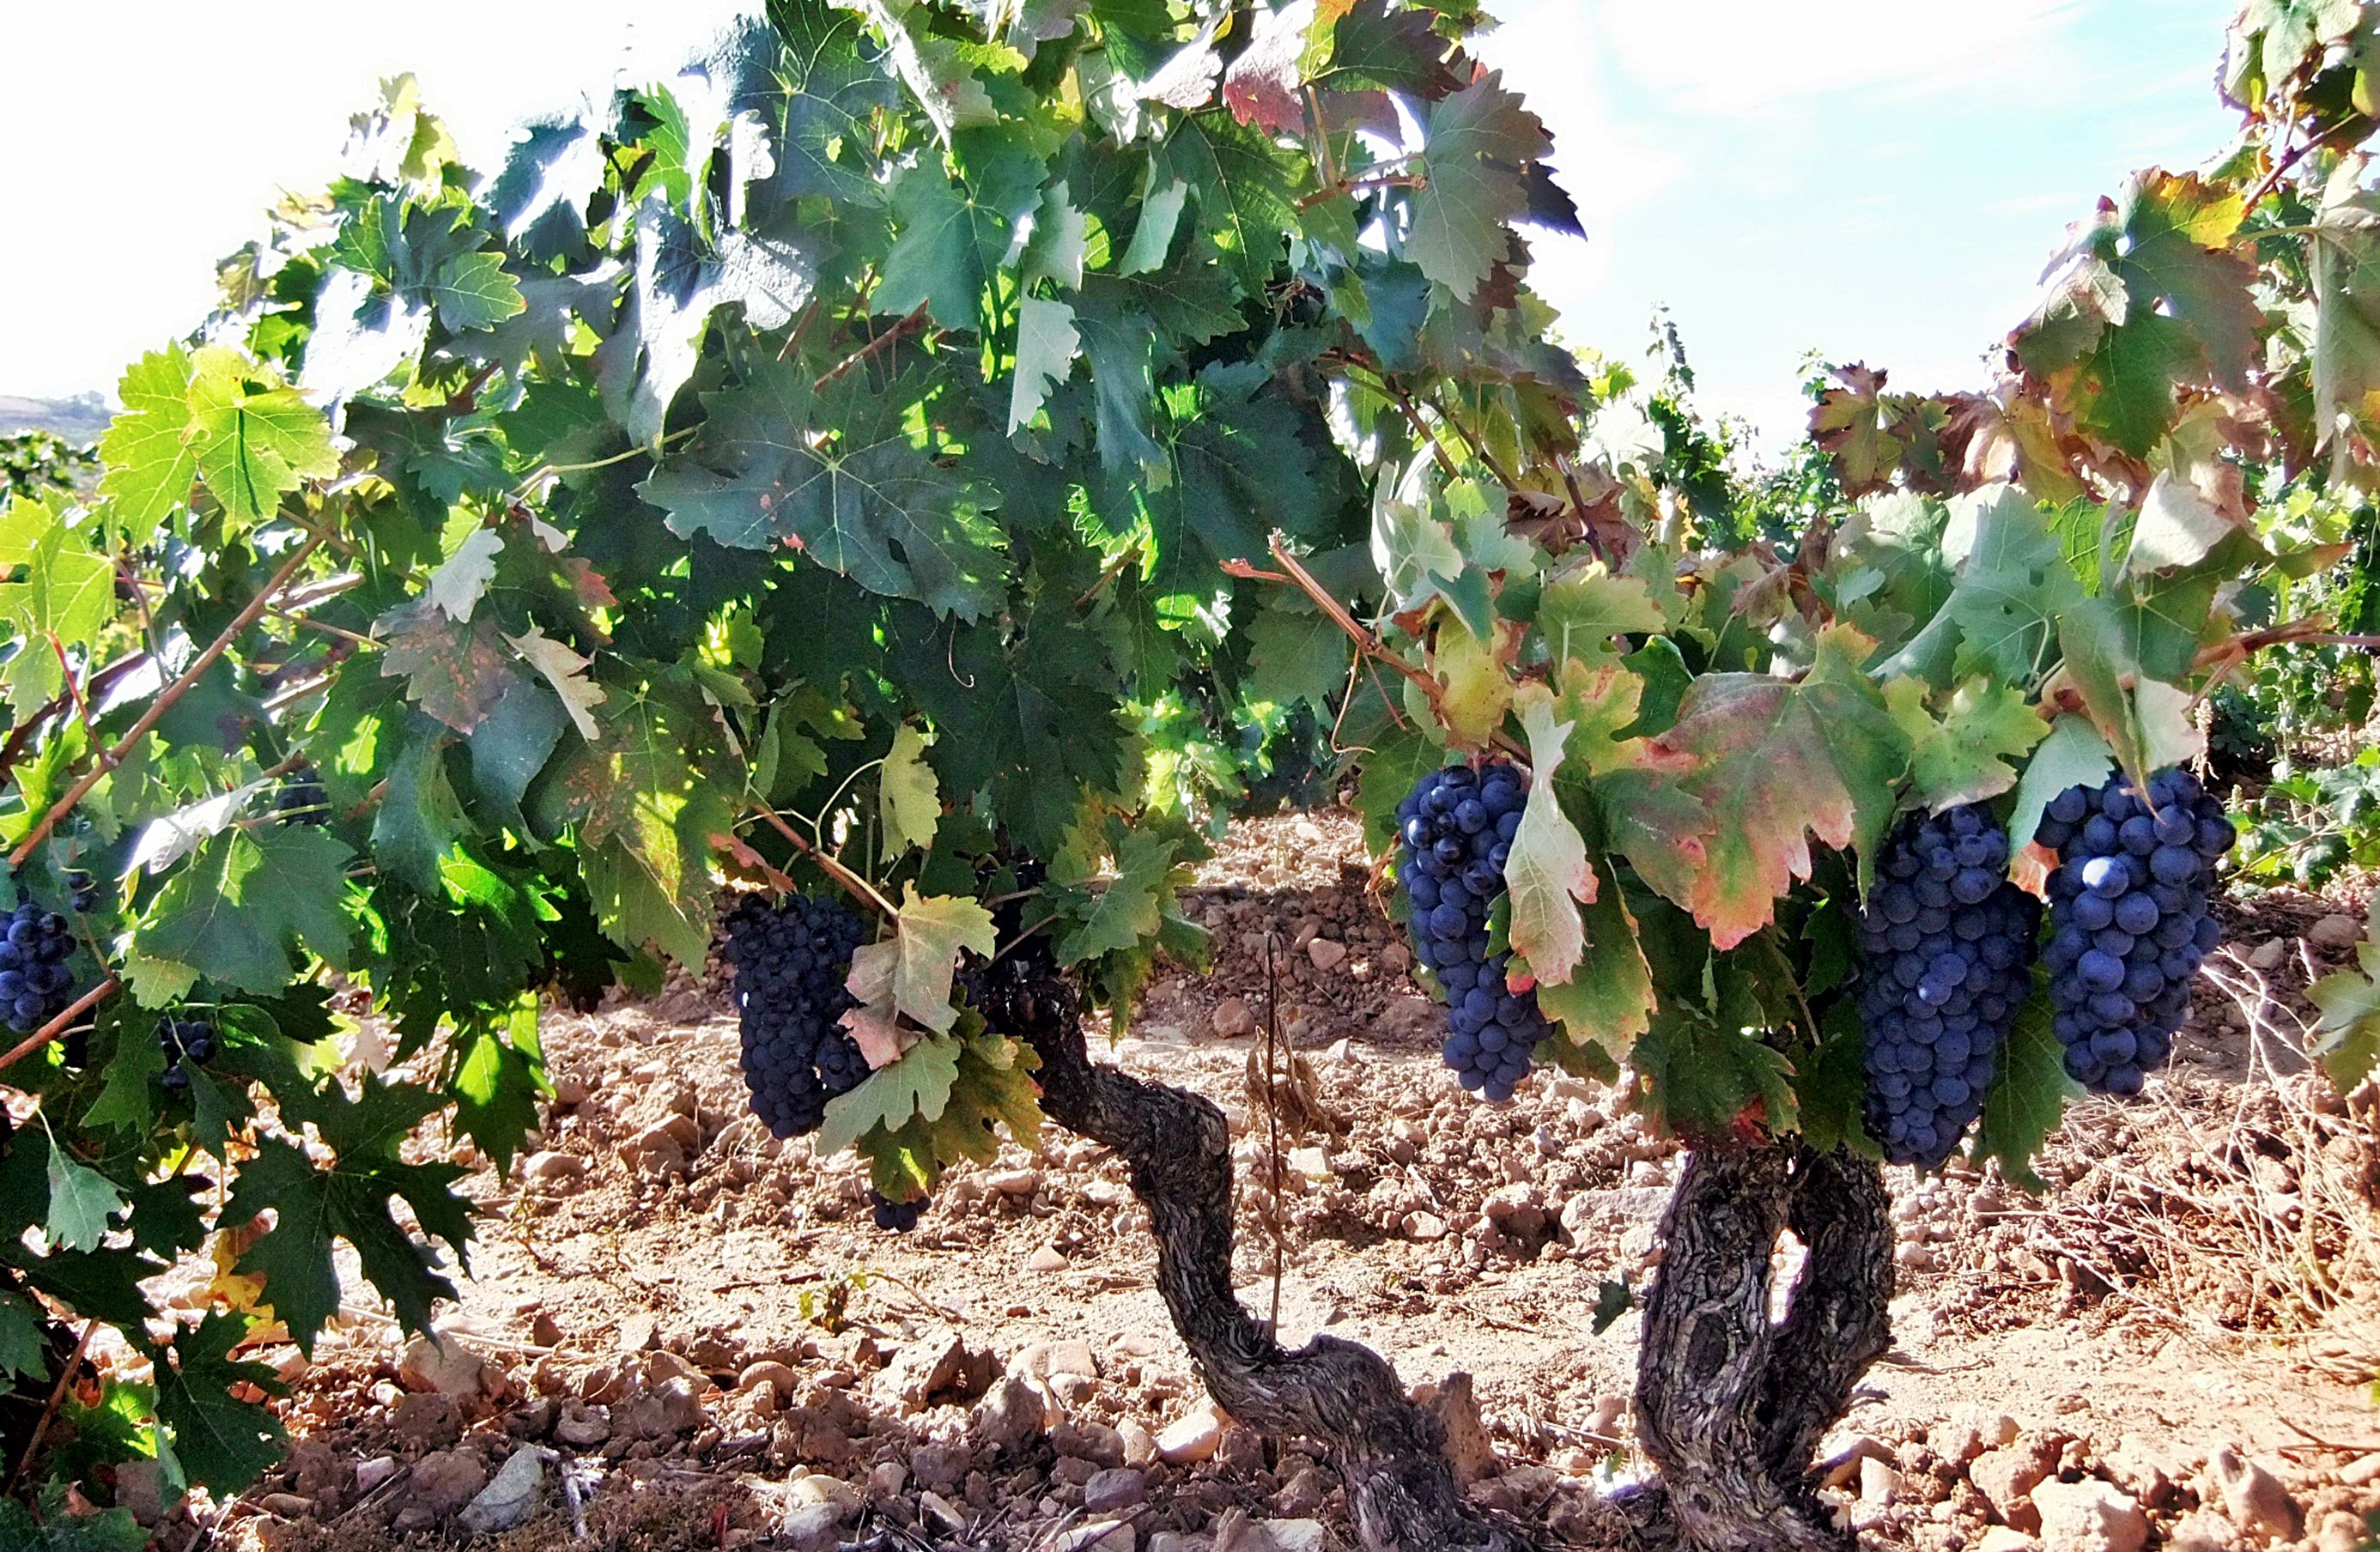 Vineyard with grapes